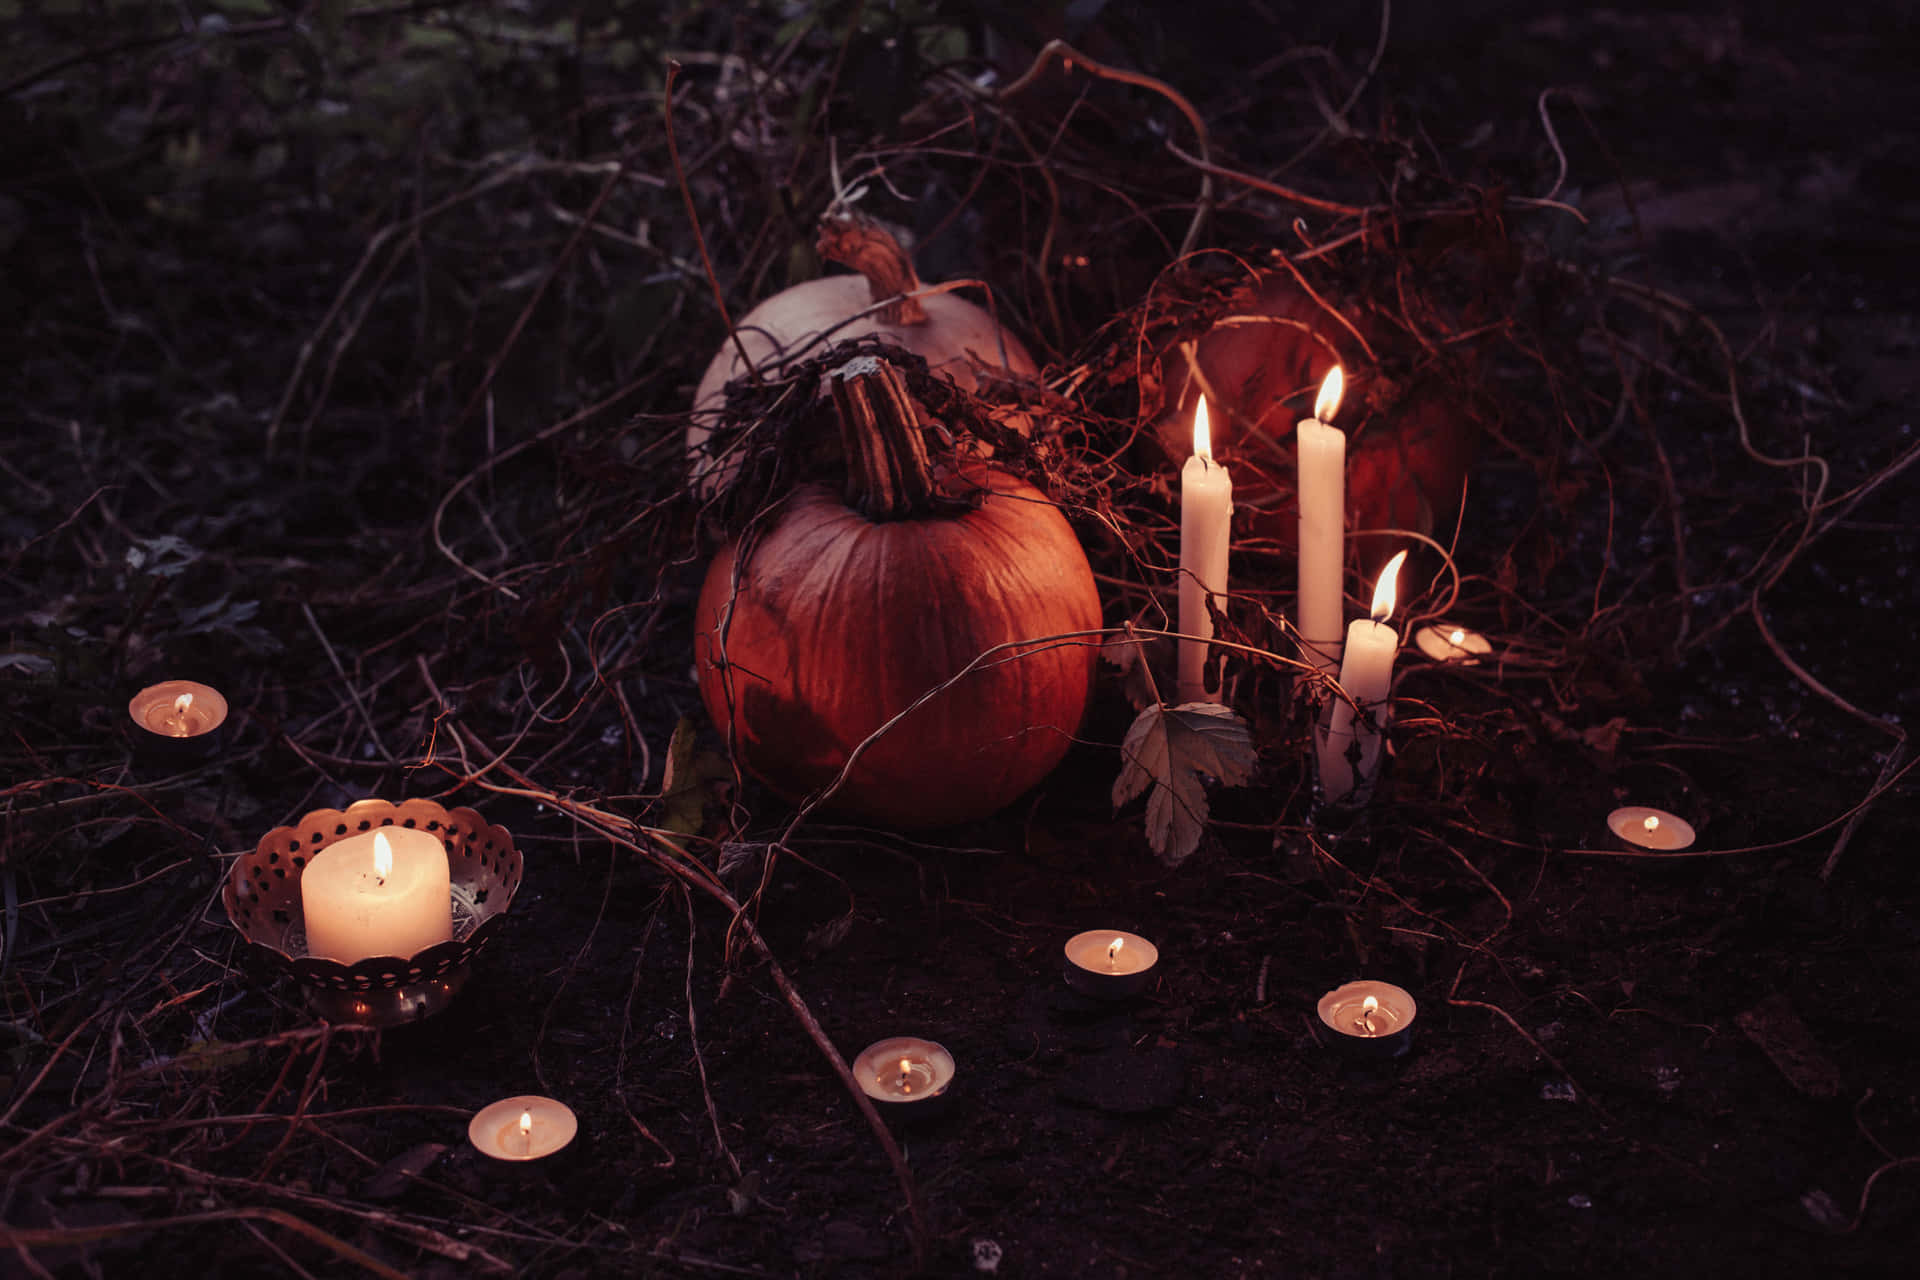 Enjoy A Chilling Night With Spooky Halloween Props! Wallpaper